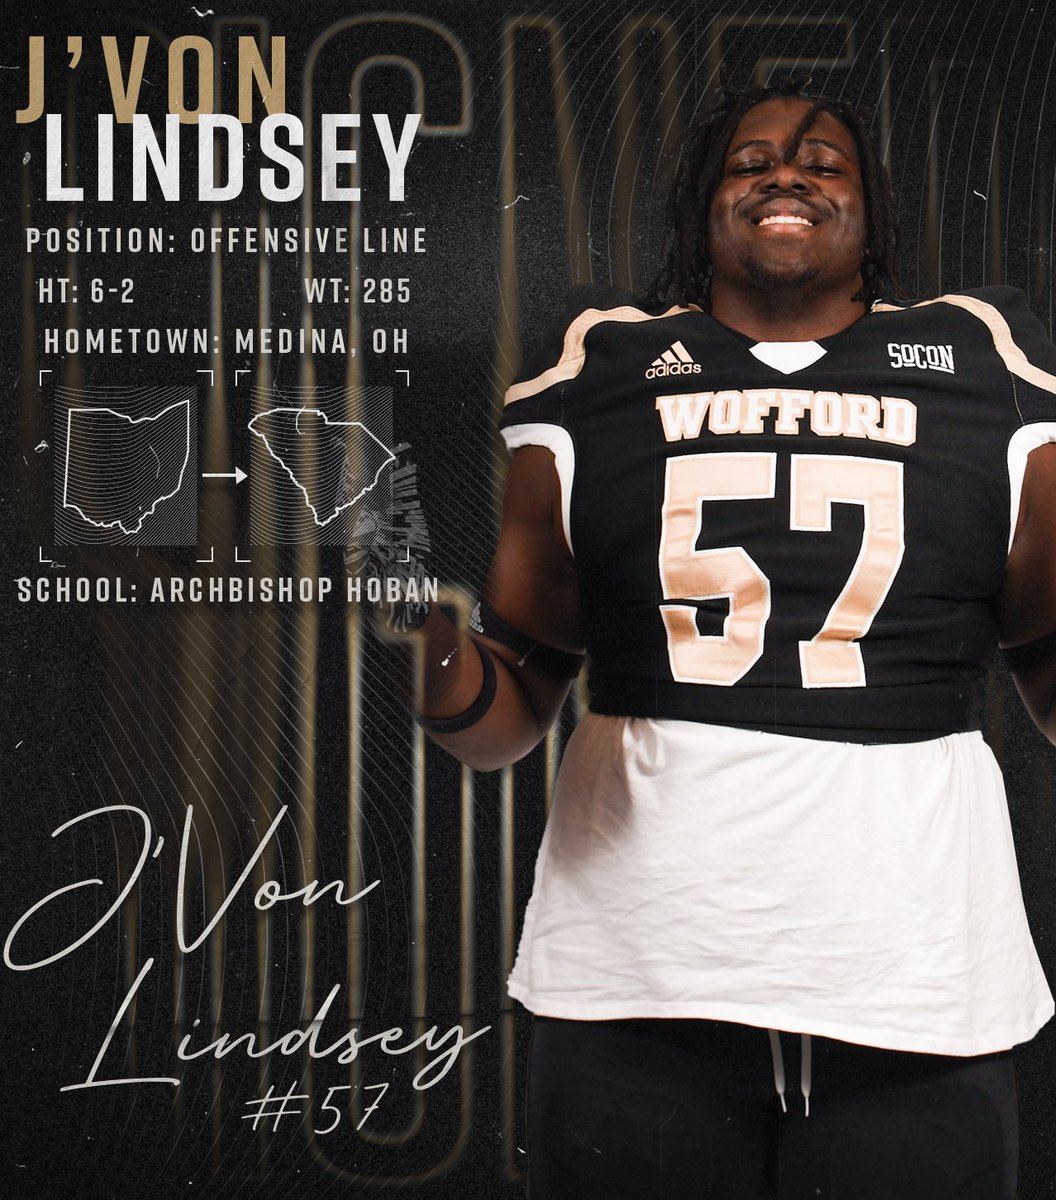 The Terriers add to the offensive line with J'Von Lindsey from Medina, Ohio!